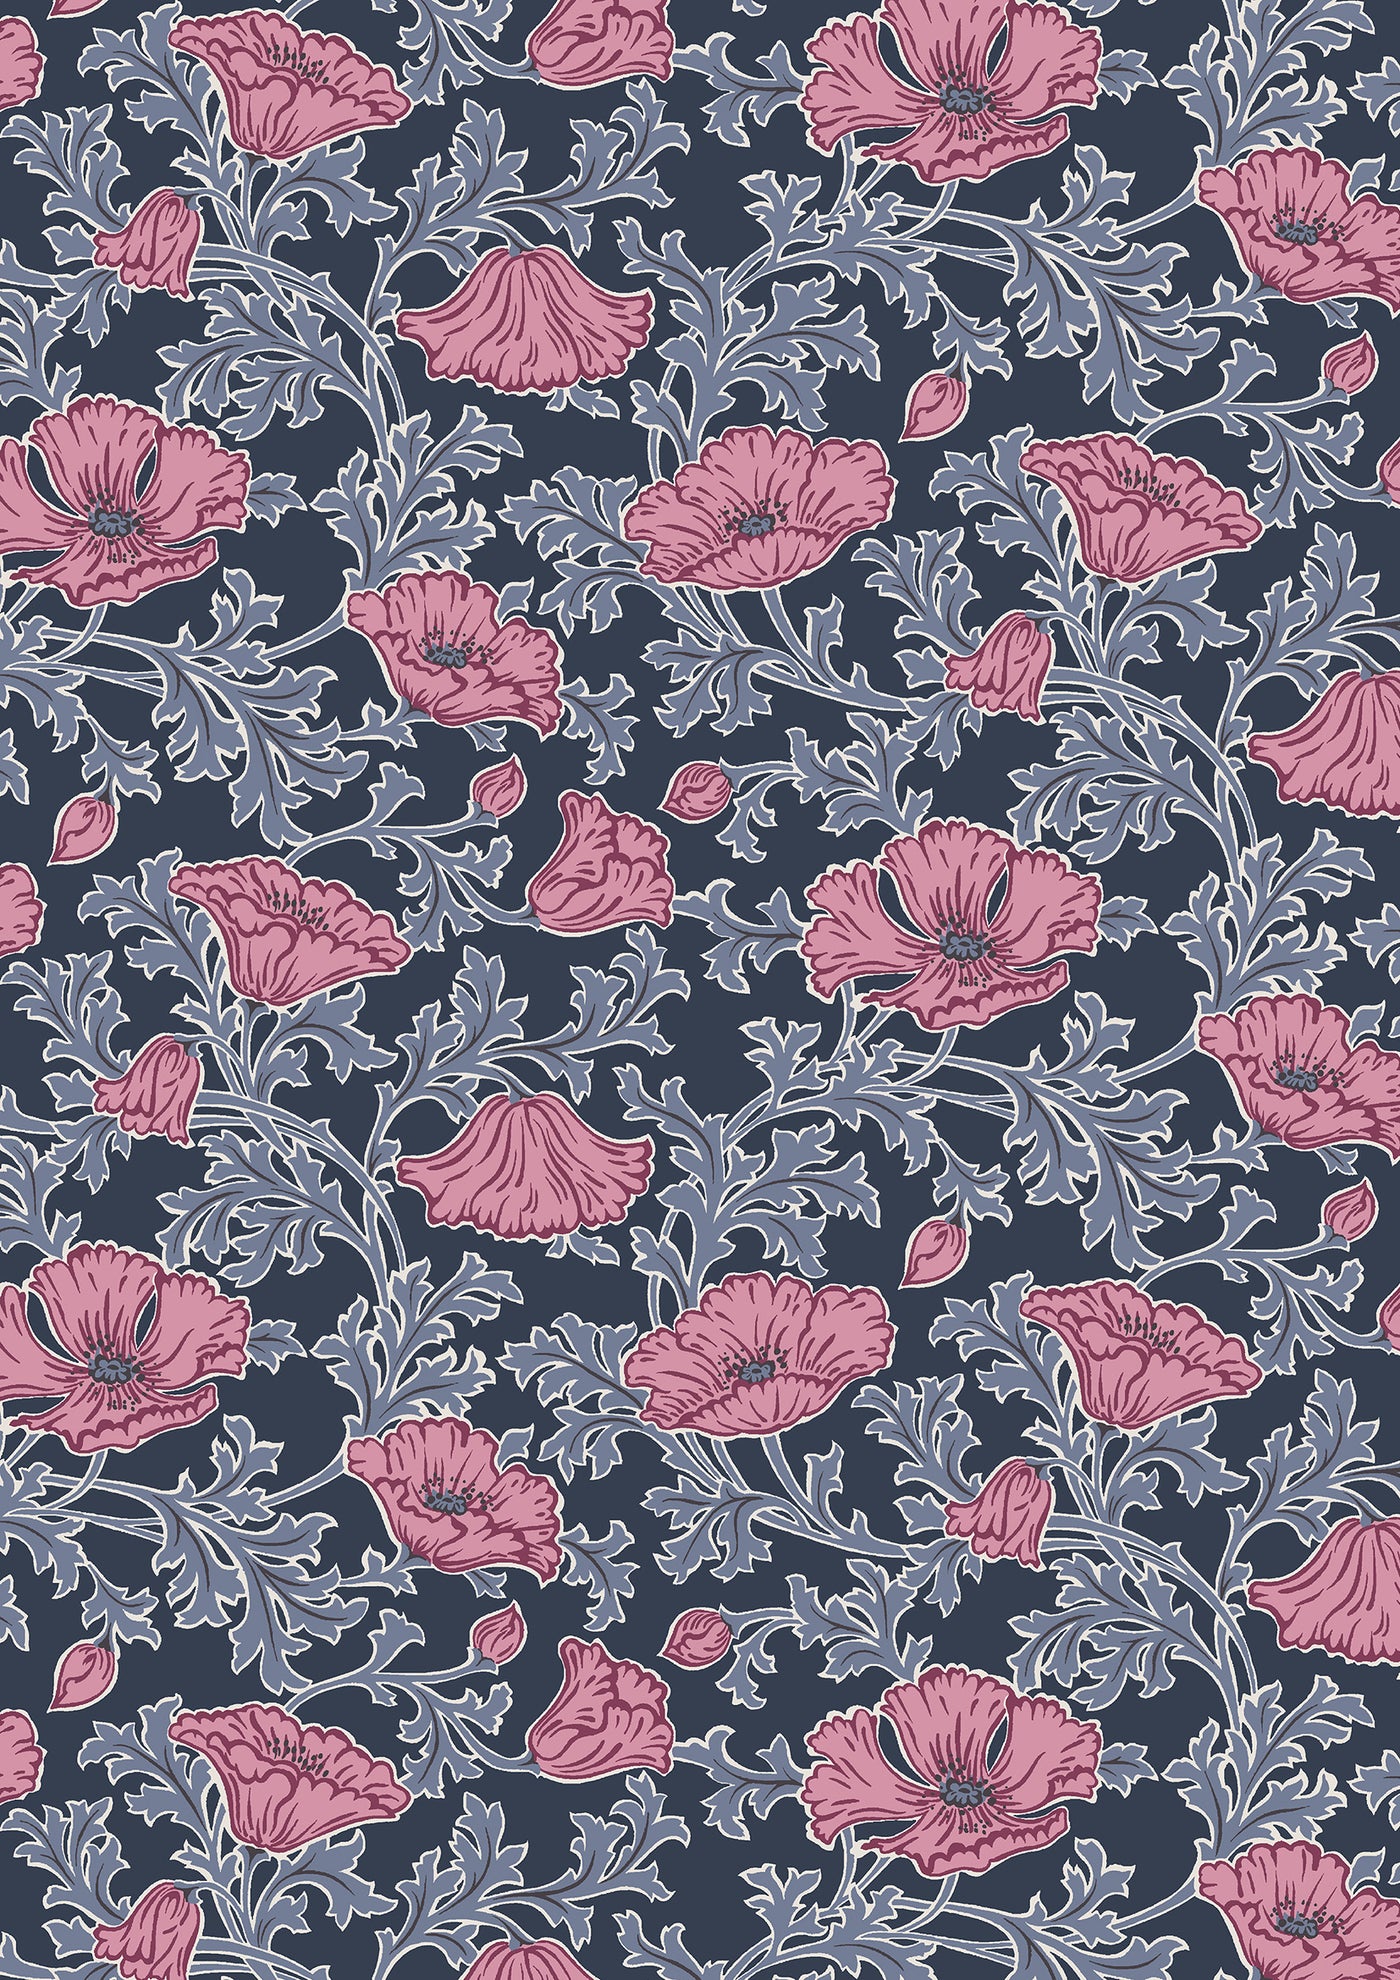 Beatrice poppy from the winterbourne collection by Liberty of London fabrics